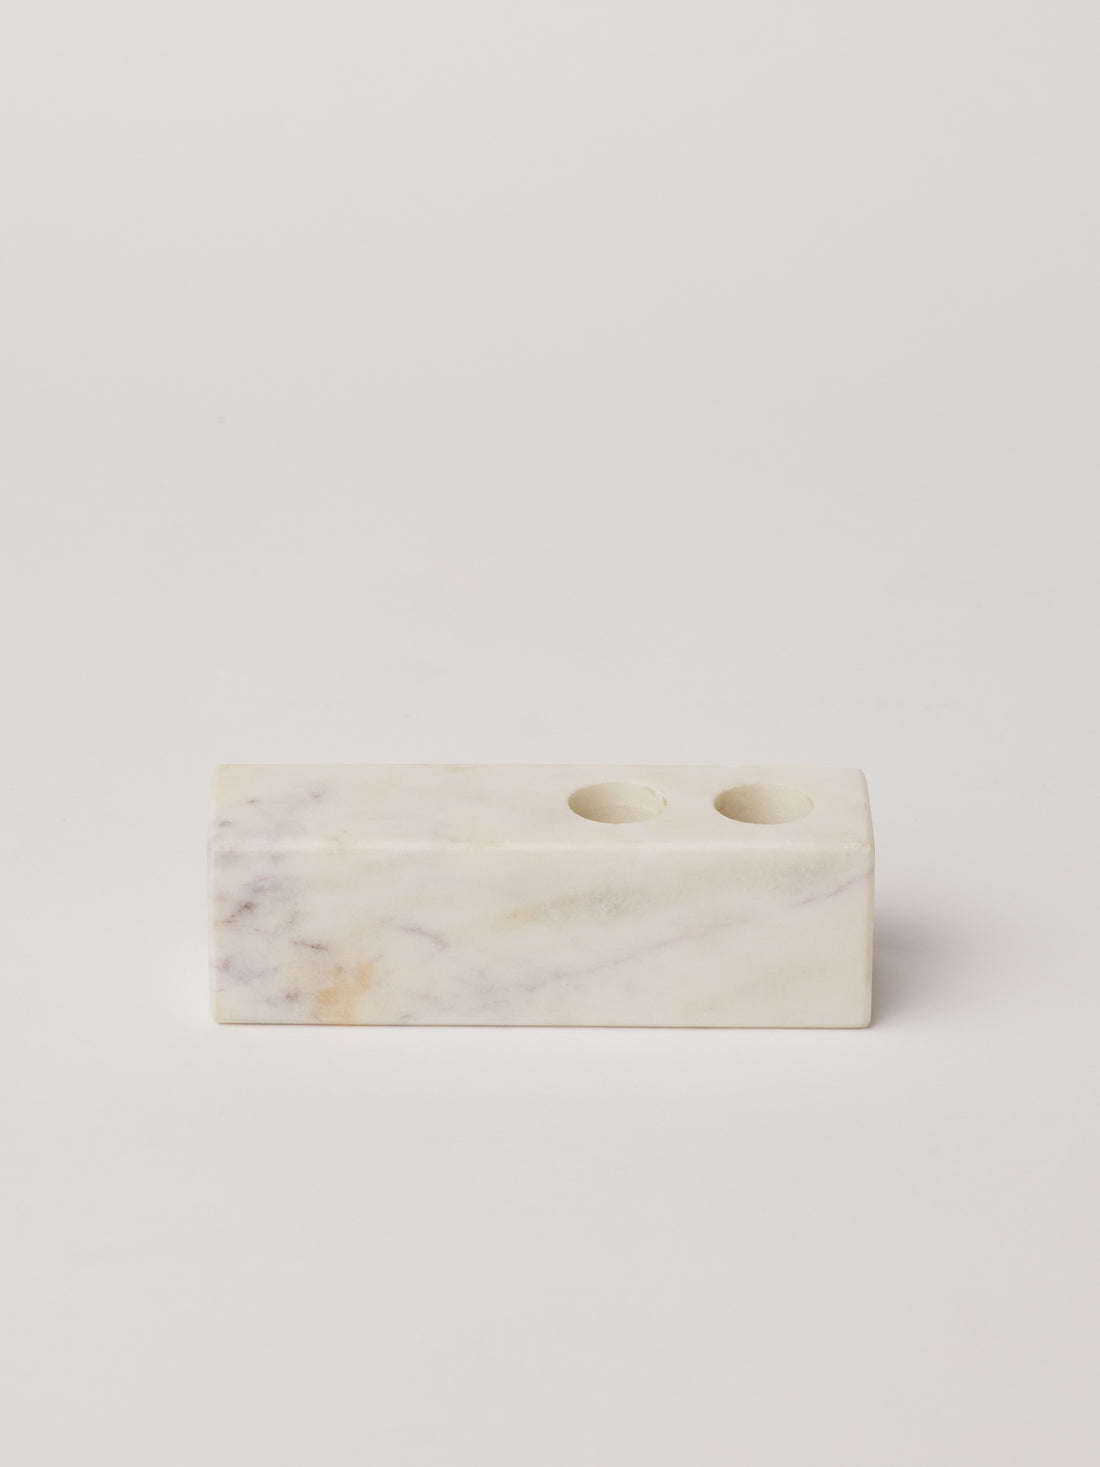 Marble Candle holder, 2 candles - Fleck